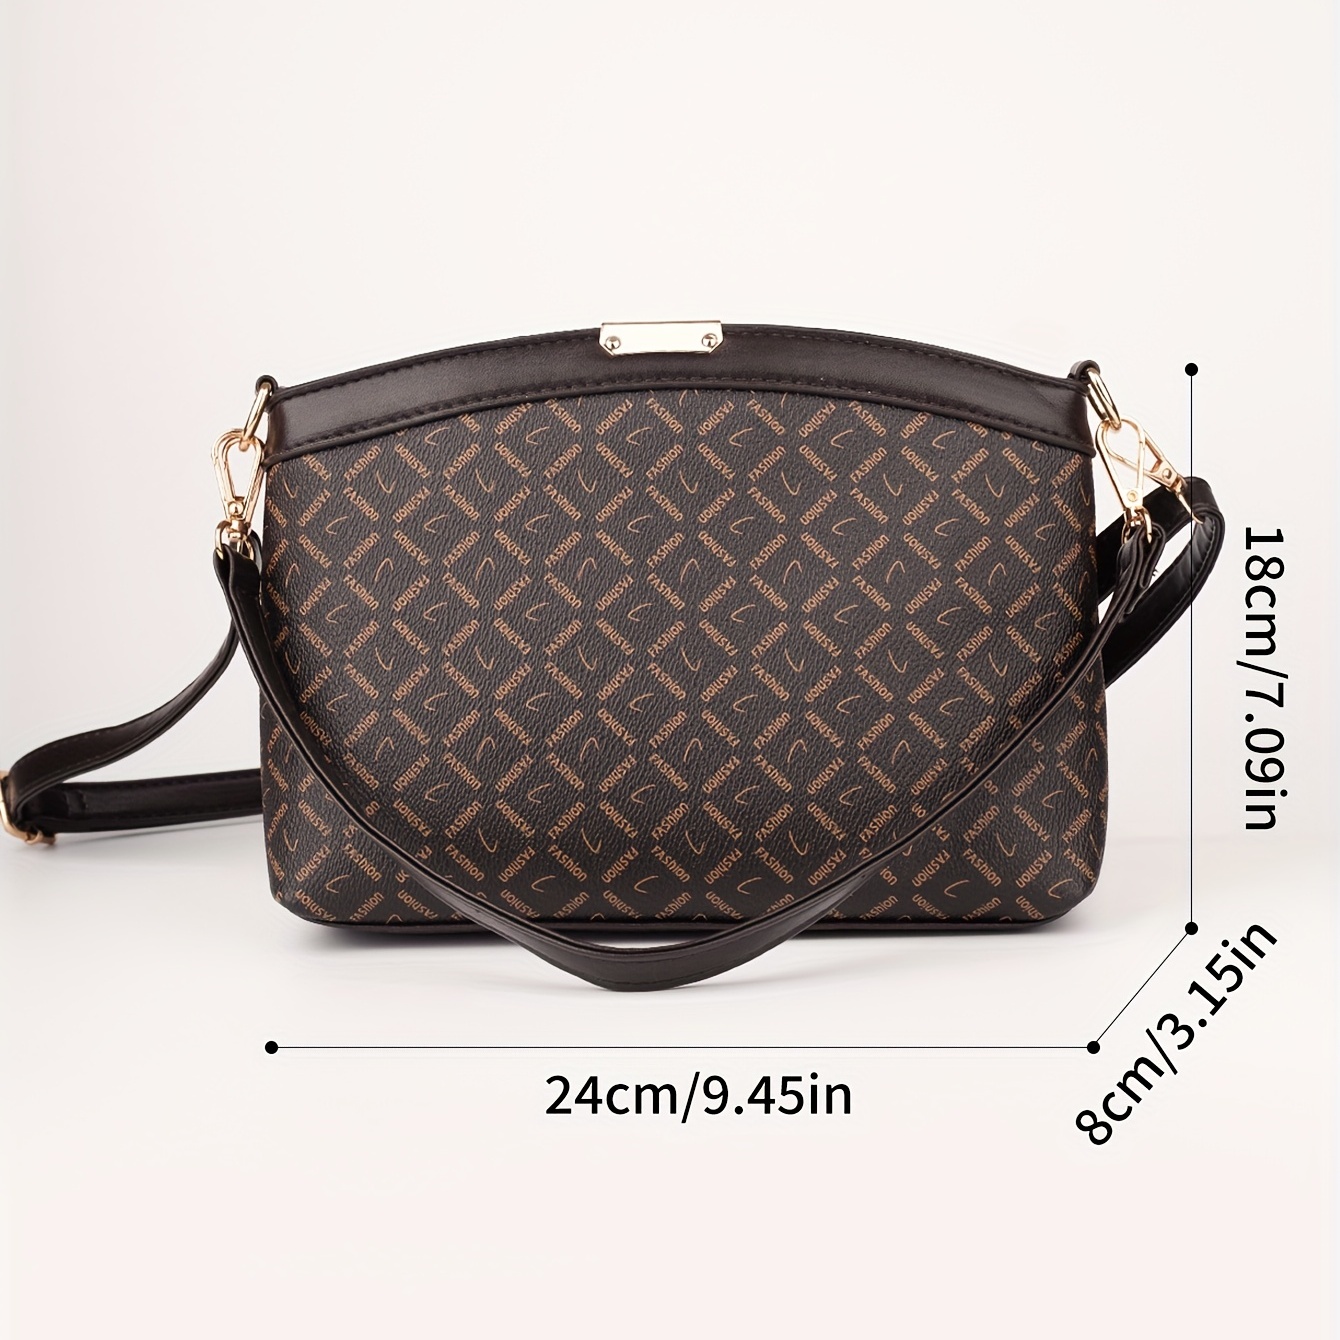 Fashionable And Simple Printed Women's Shoulder/Crossbody Bag With